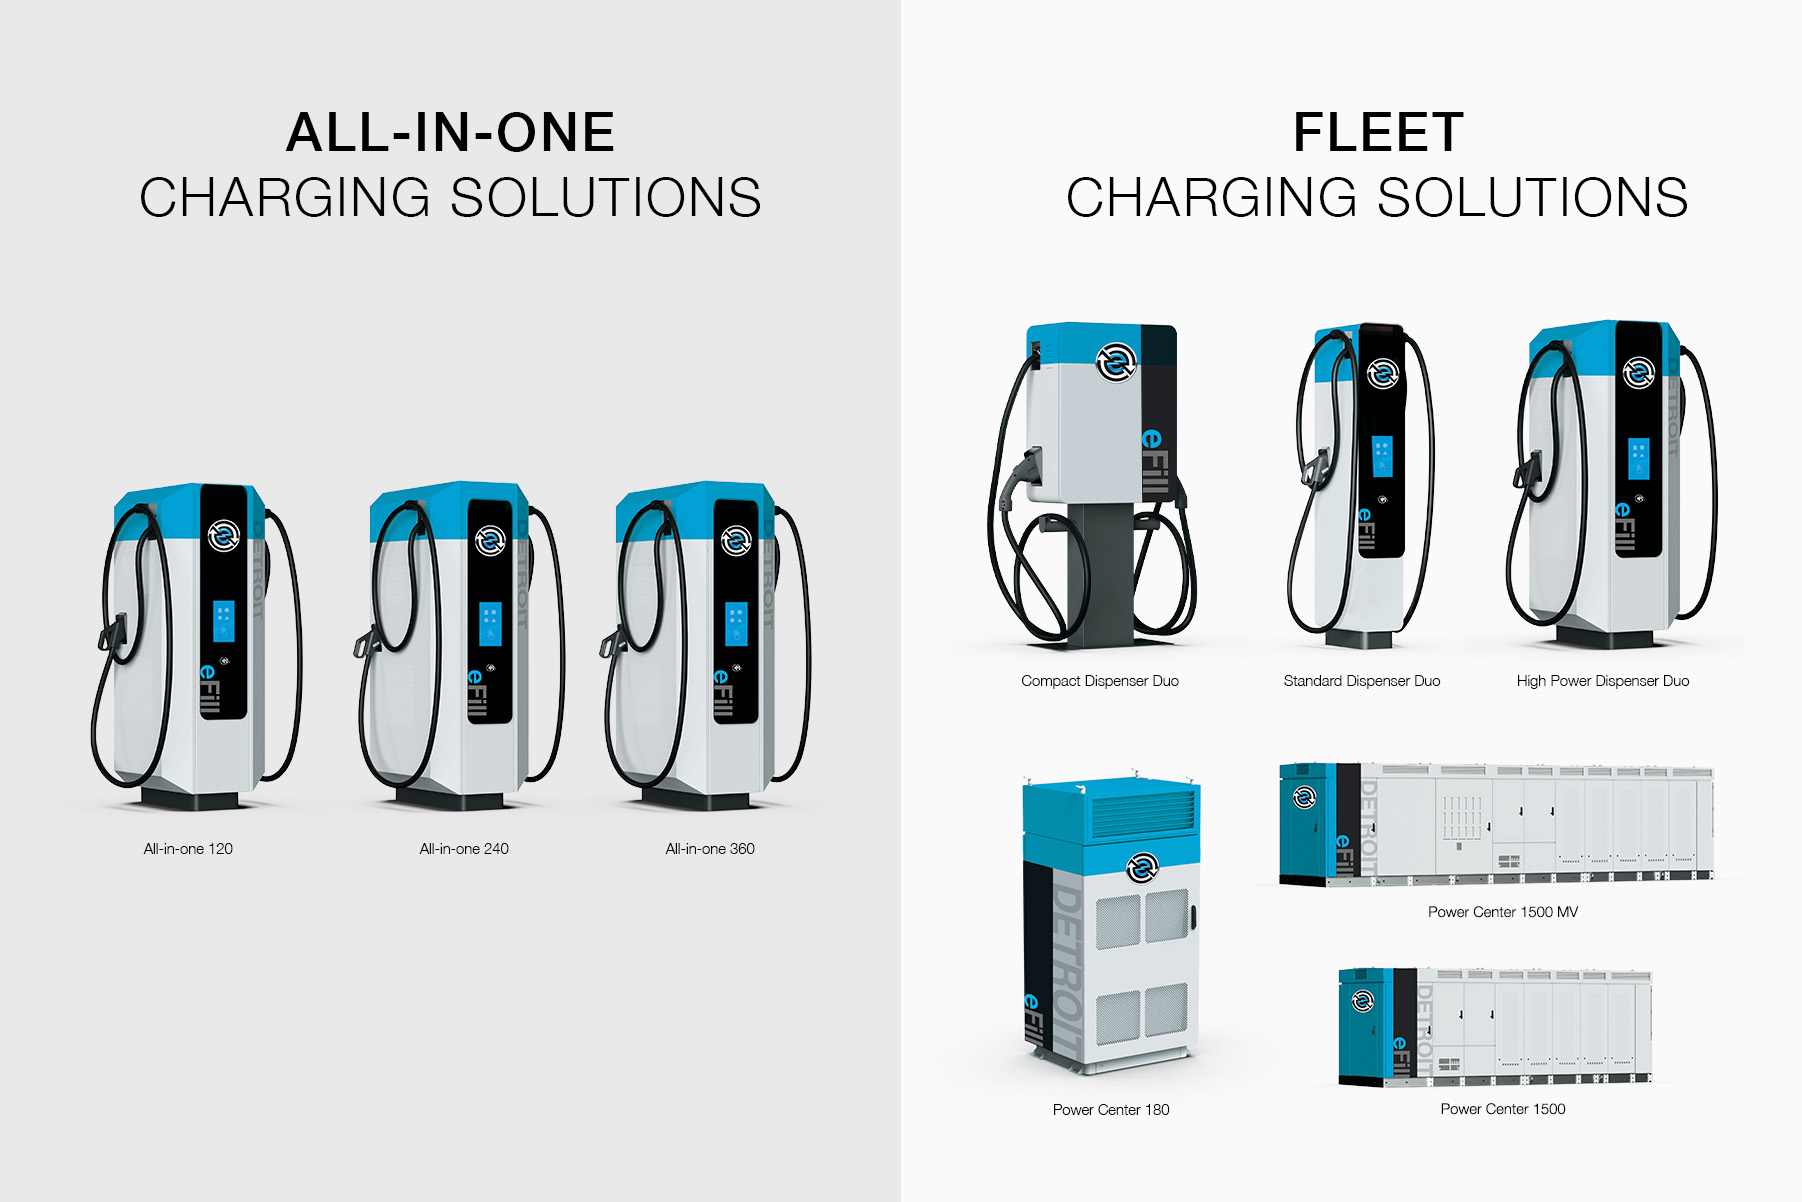 A marketing image that displays the Detroit eFill charging solutions.